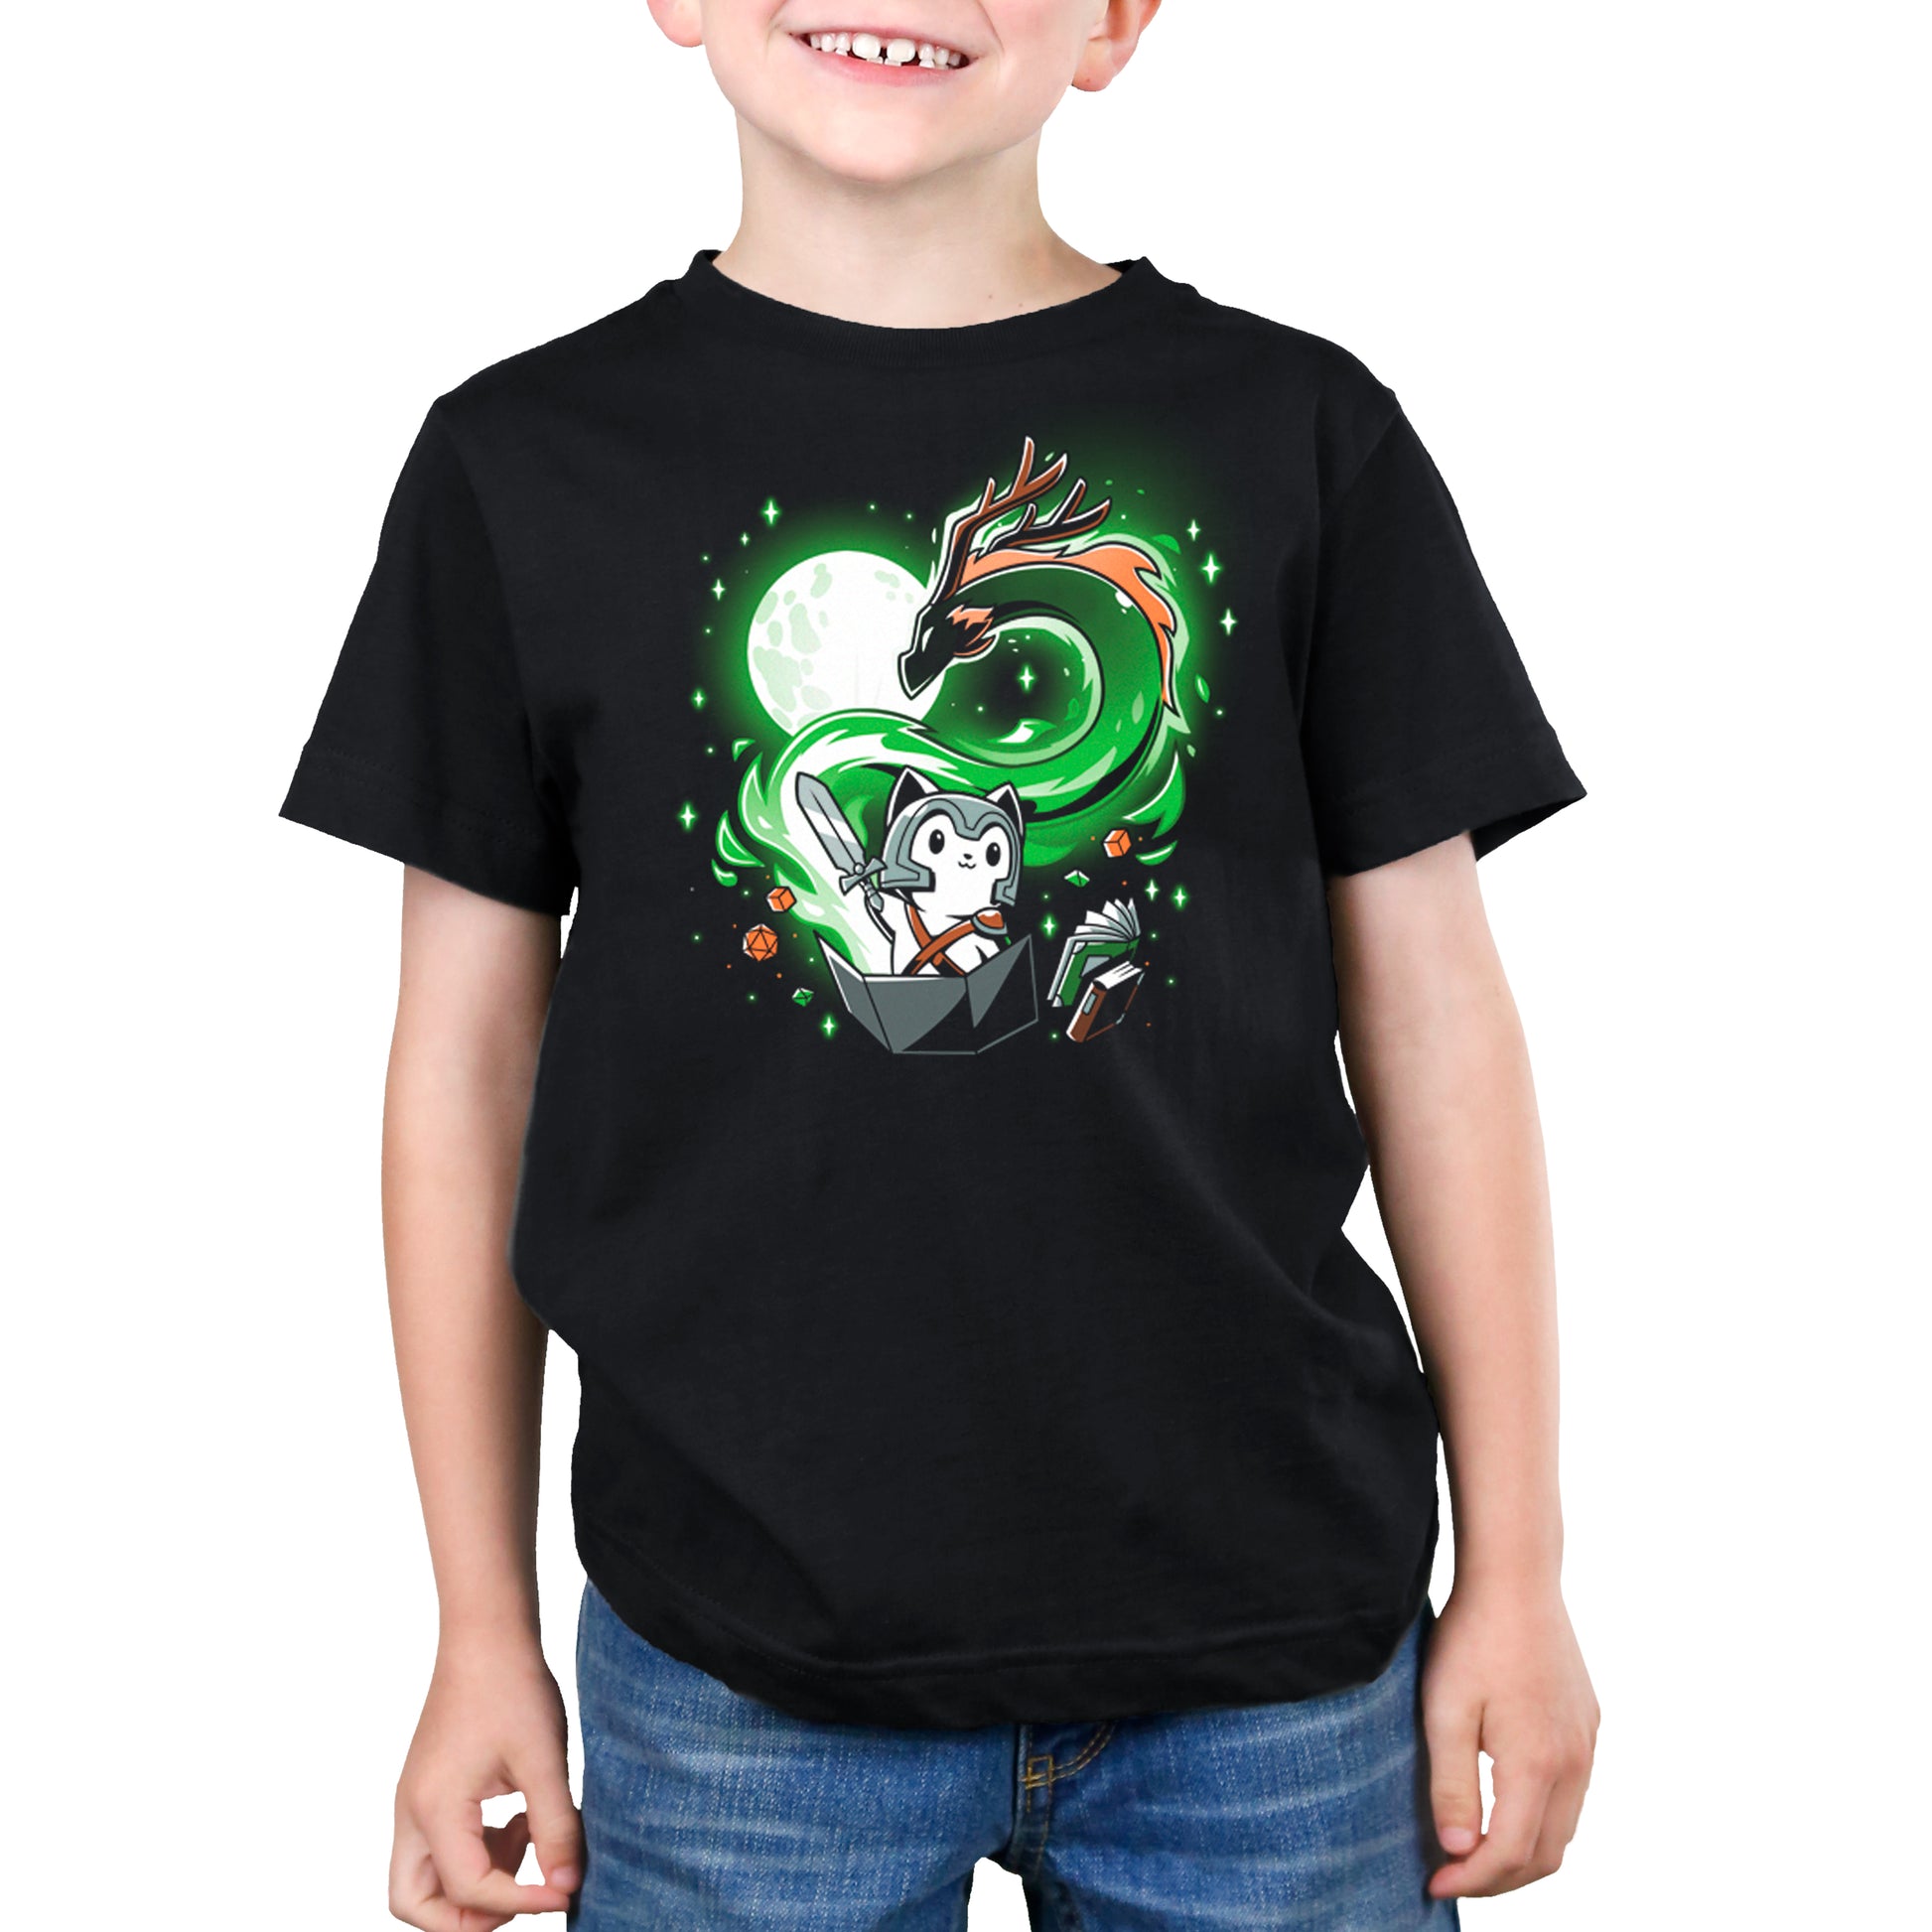 A young boy donning a TeeTurtle A Tale of Adventure black t-shirt featuring a green dragon, embarking on a role-playing adventure.